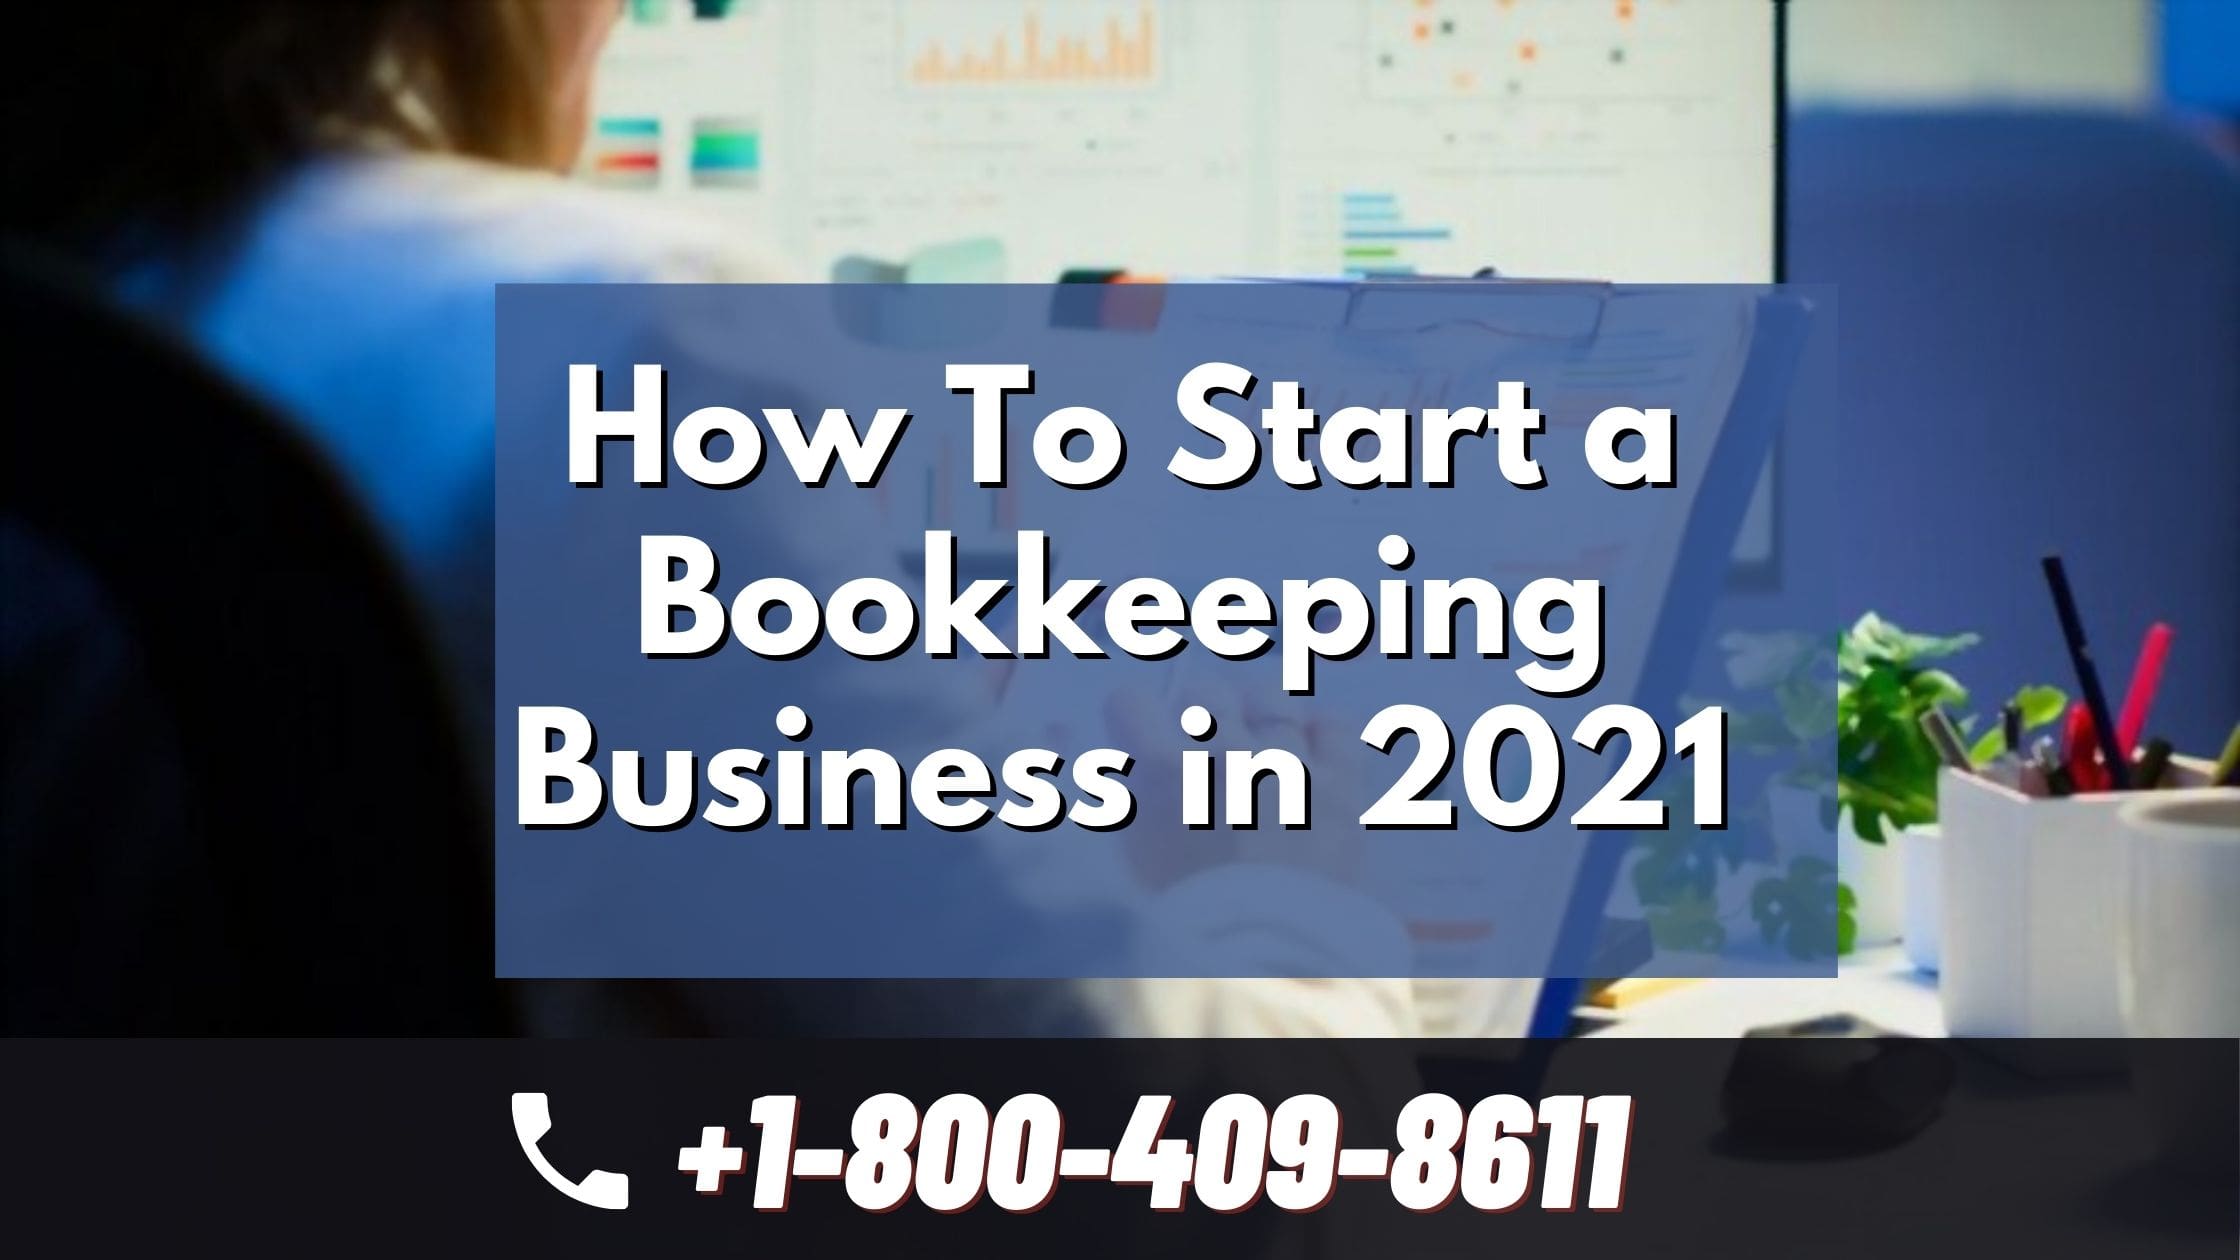 How To Start a Bookkeeping Business in 2021